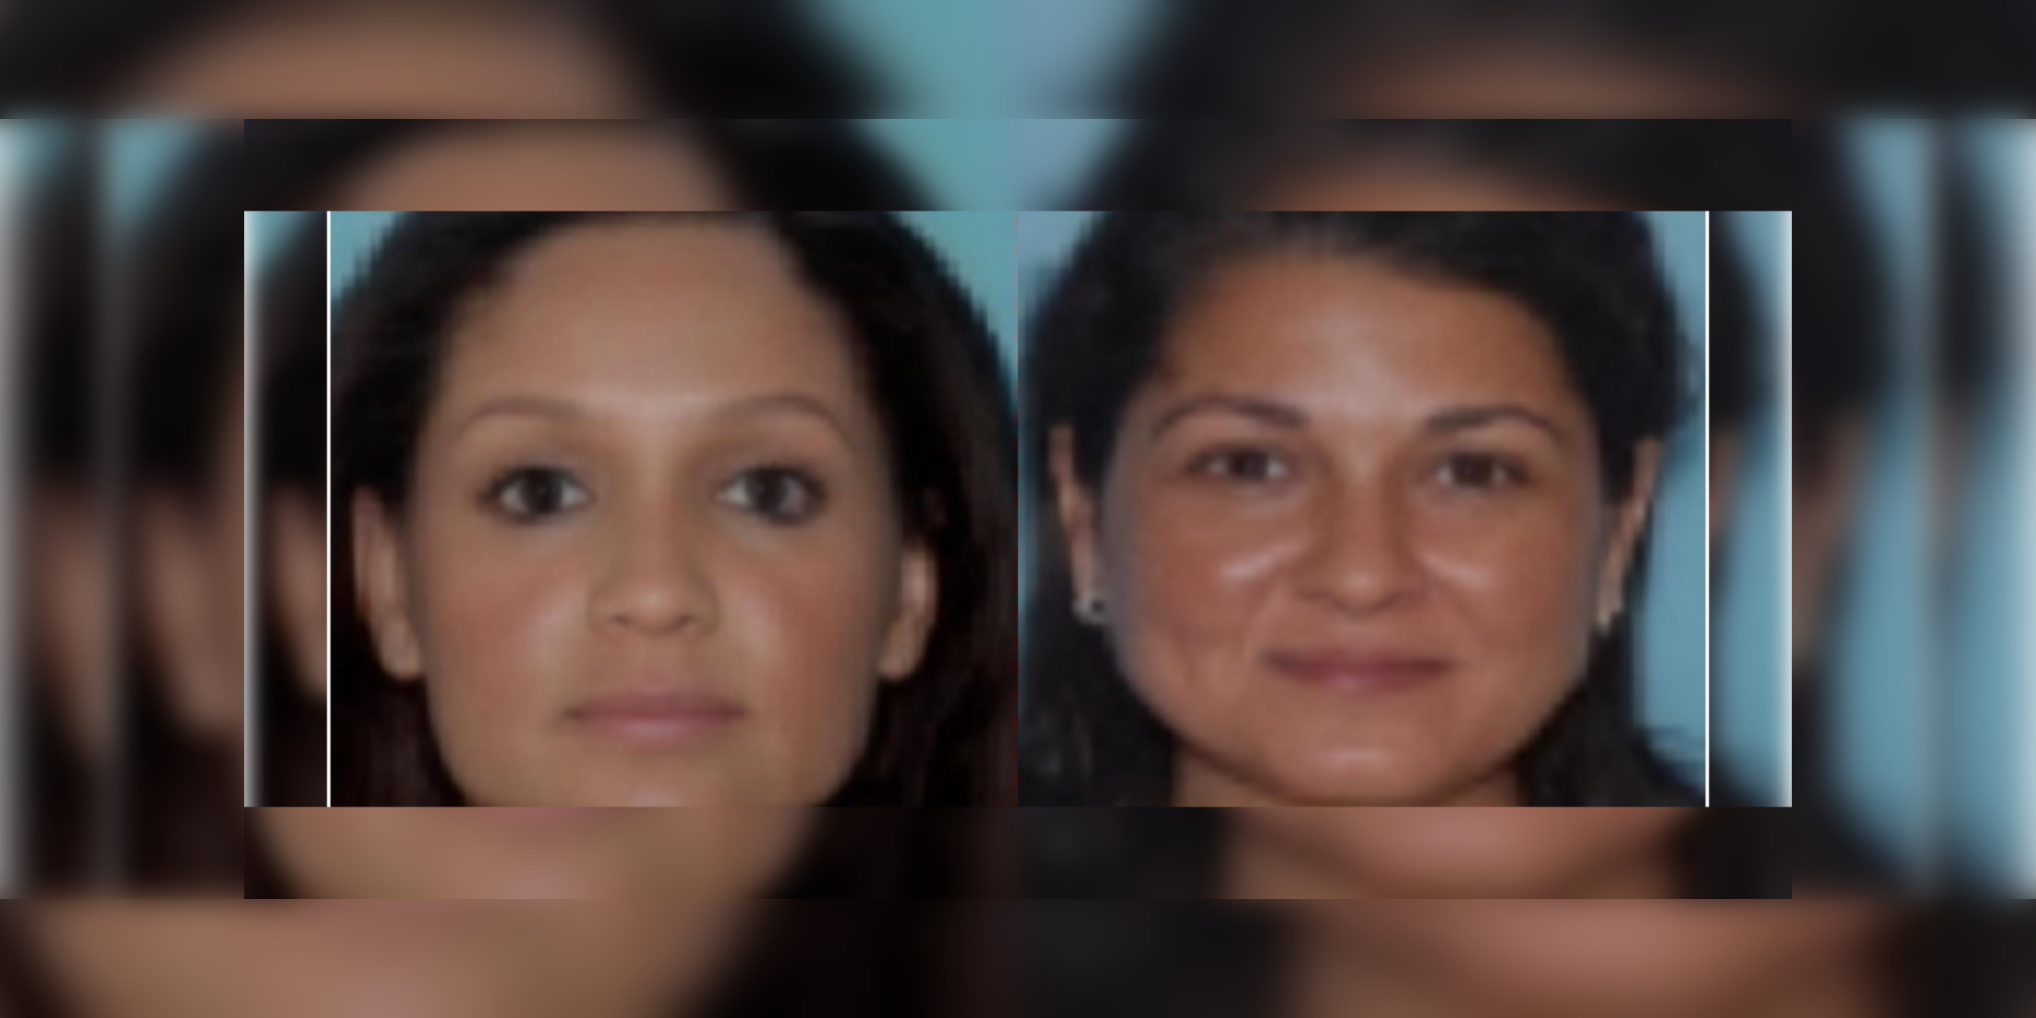 Two Women Arrested After Scamming Several Elderly Men Out Of Millions Of Dollars